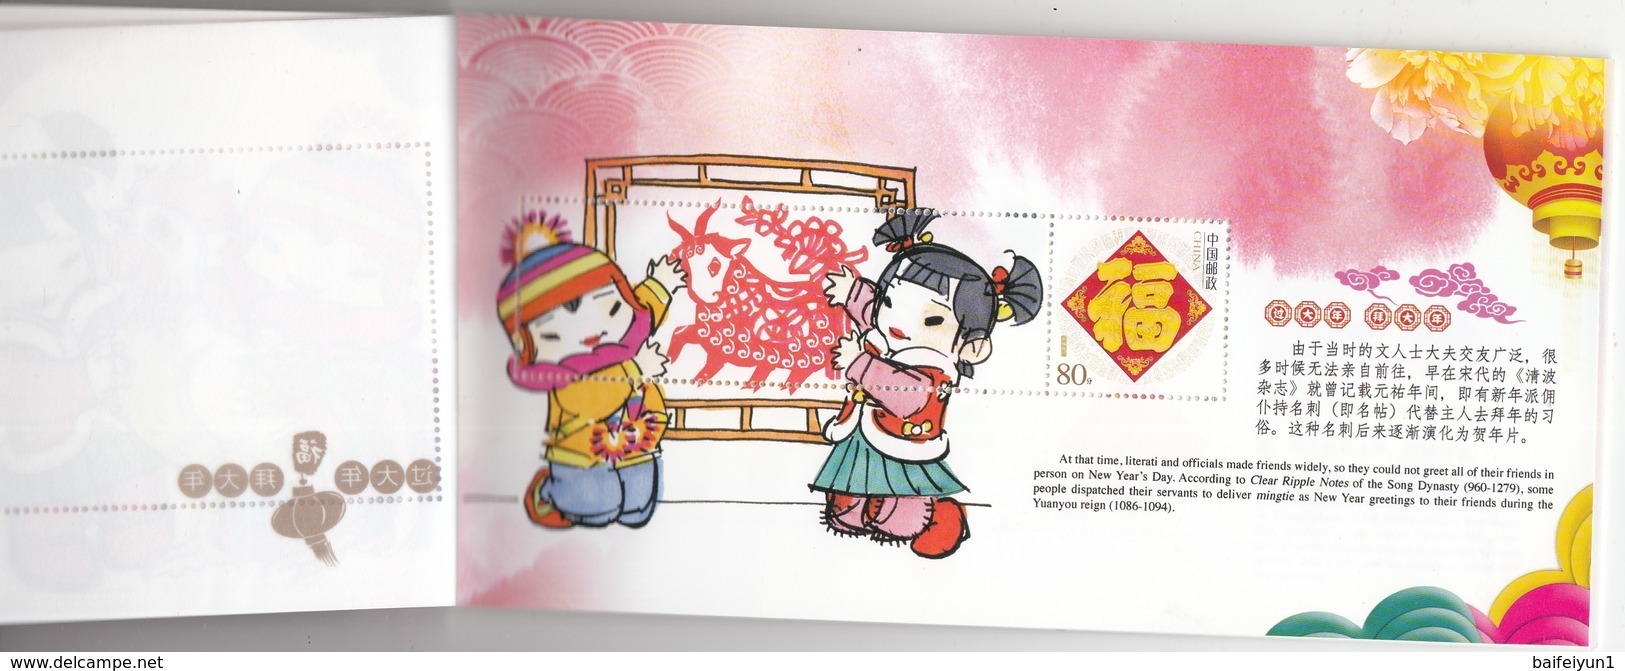 China 2017  Make a ceremonial call on New Year Special  Booklet(The words of Cover is holographic)